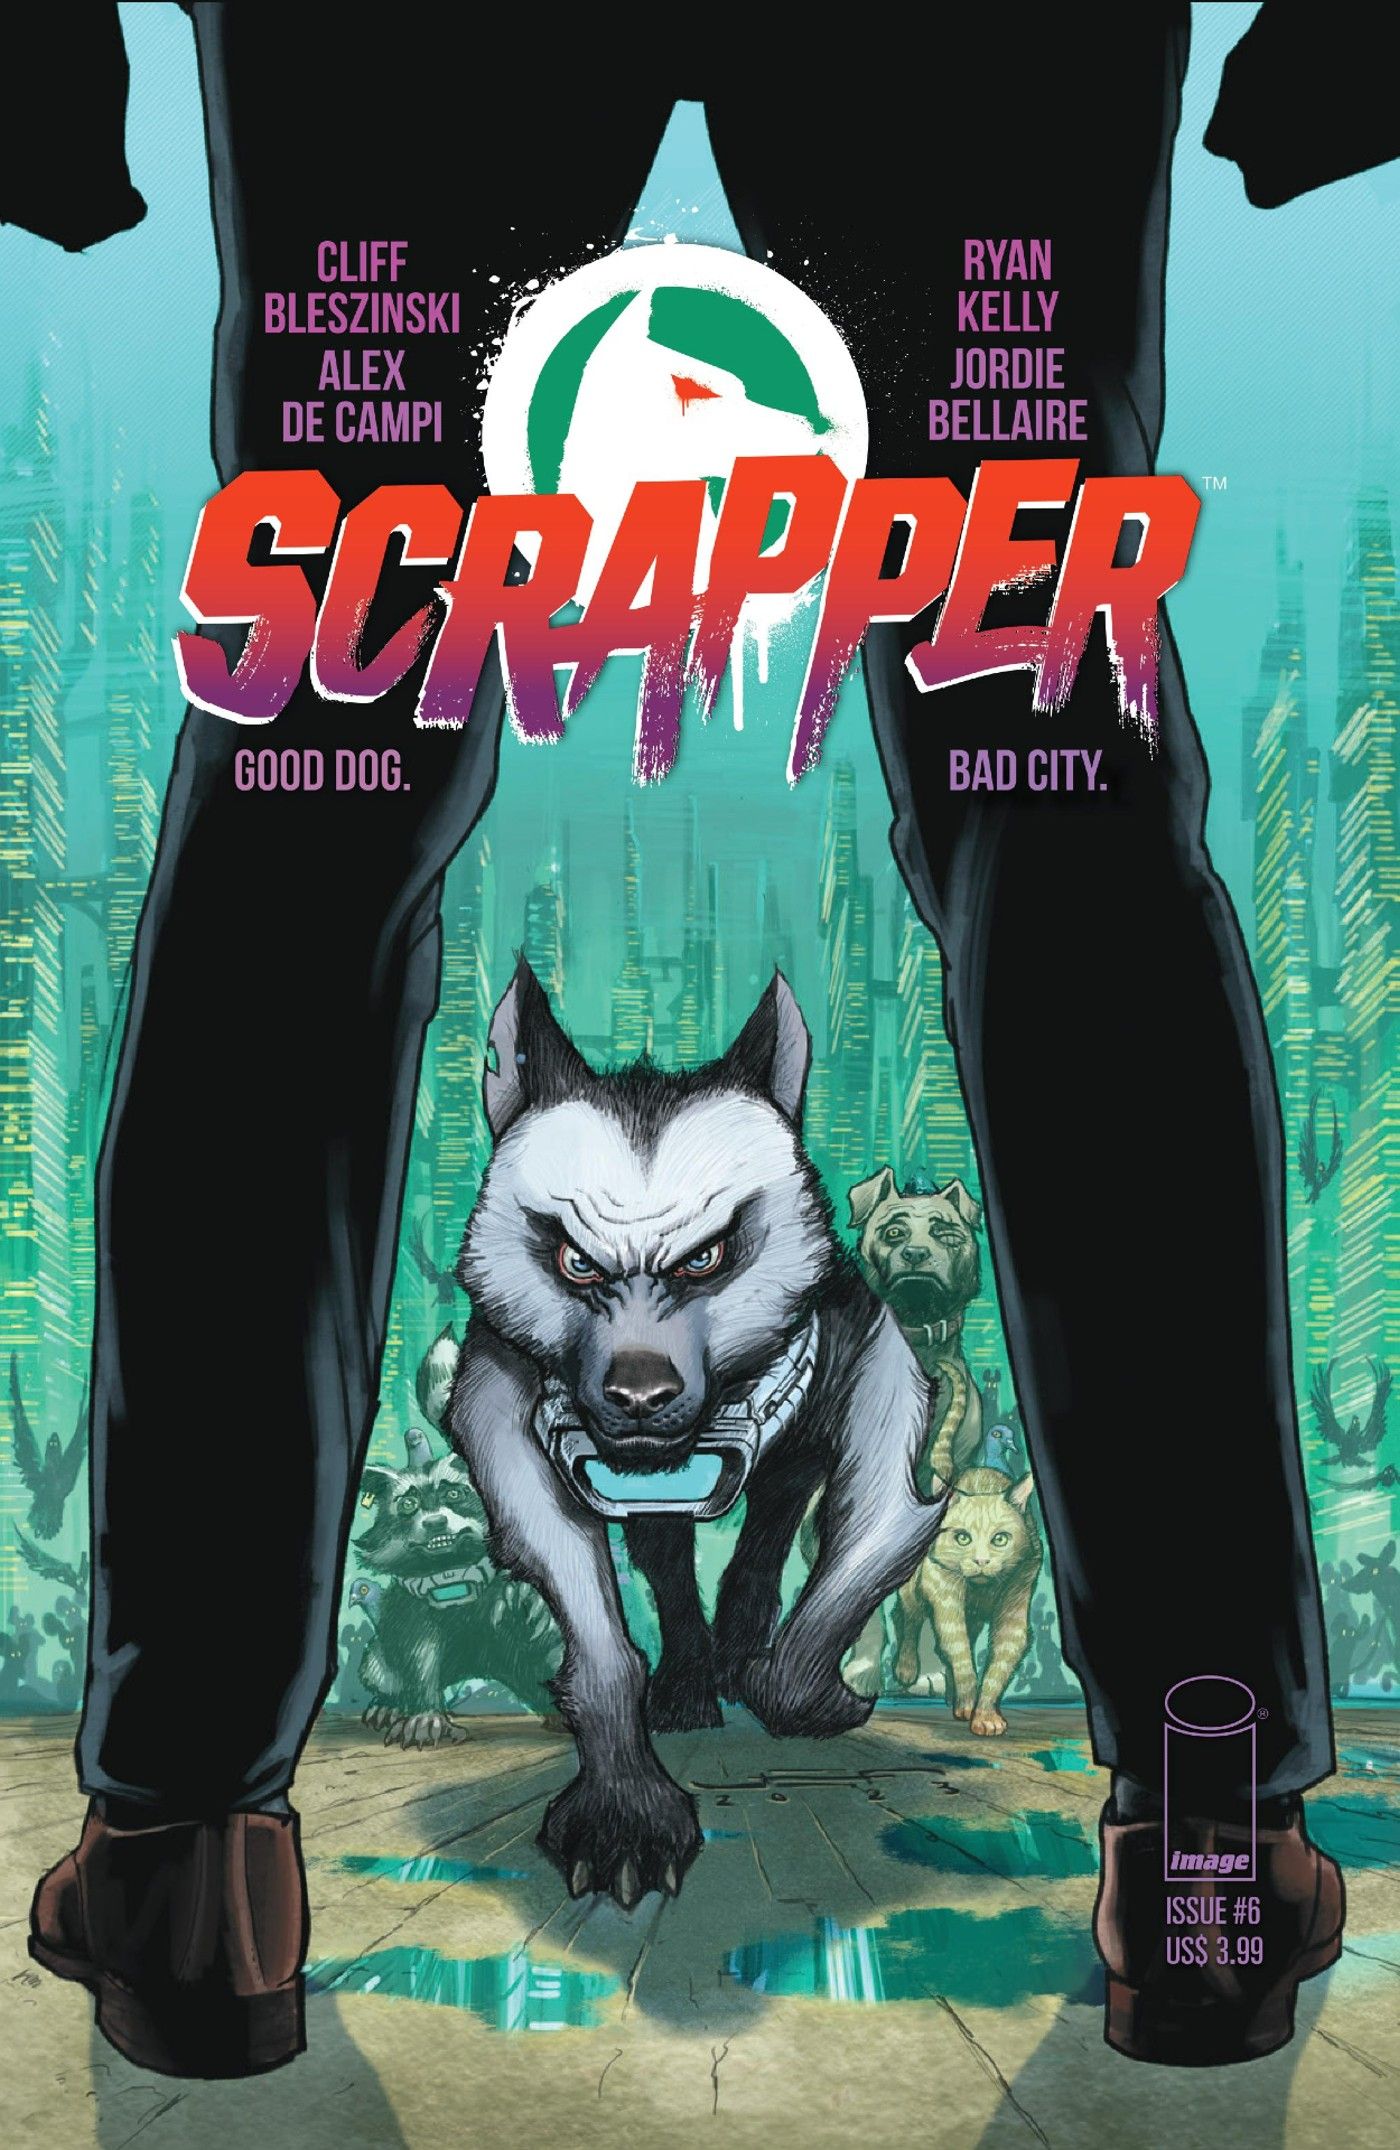 SCRAPPER Finale Settles Why You Need to Be Reading ‘Blade Runner with Dogs’ (Exclusive Preview)